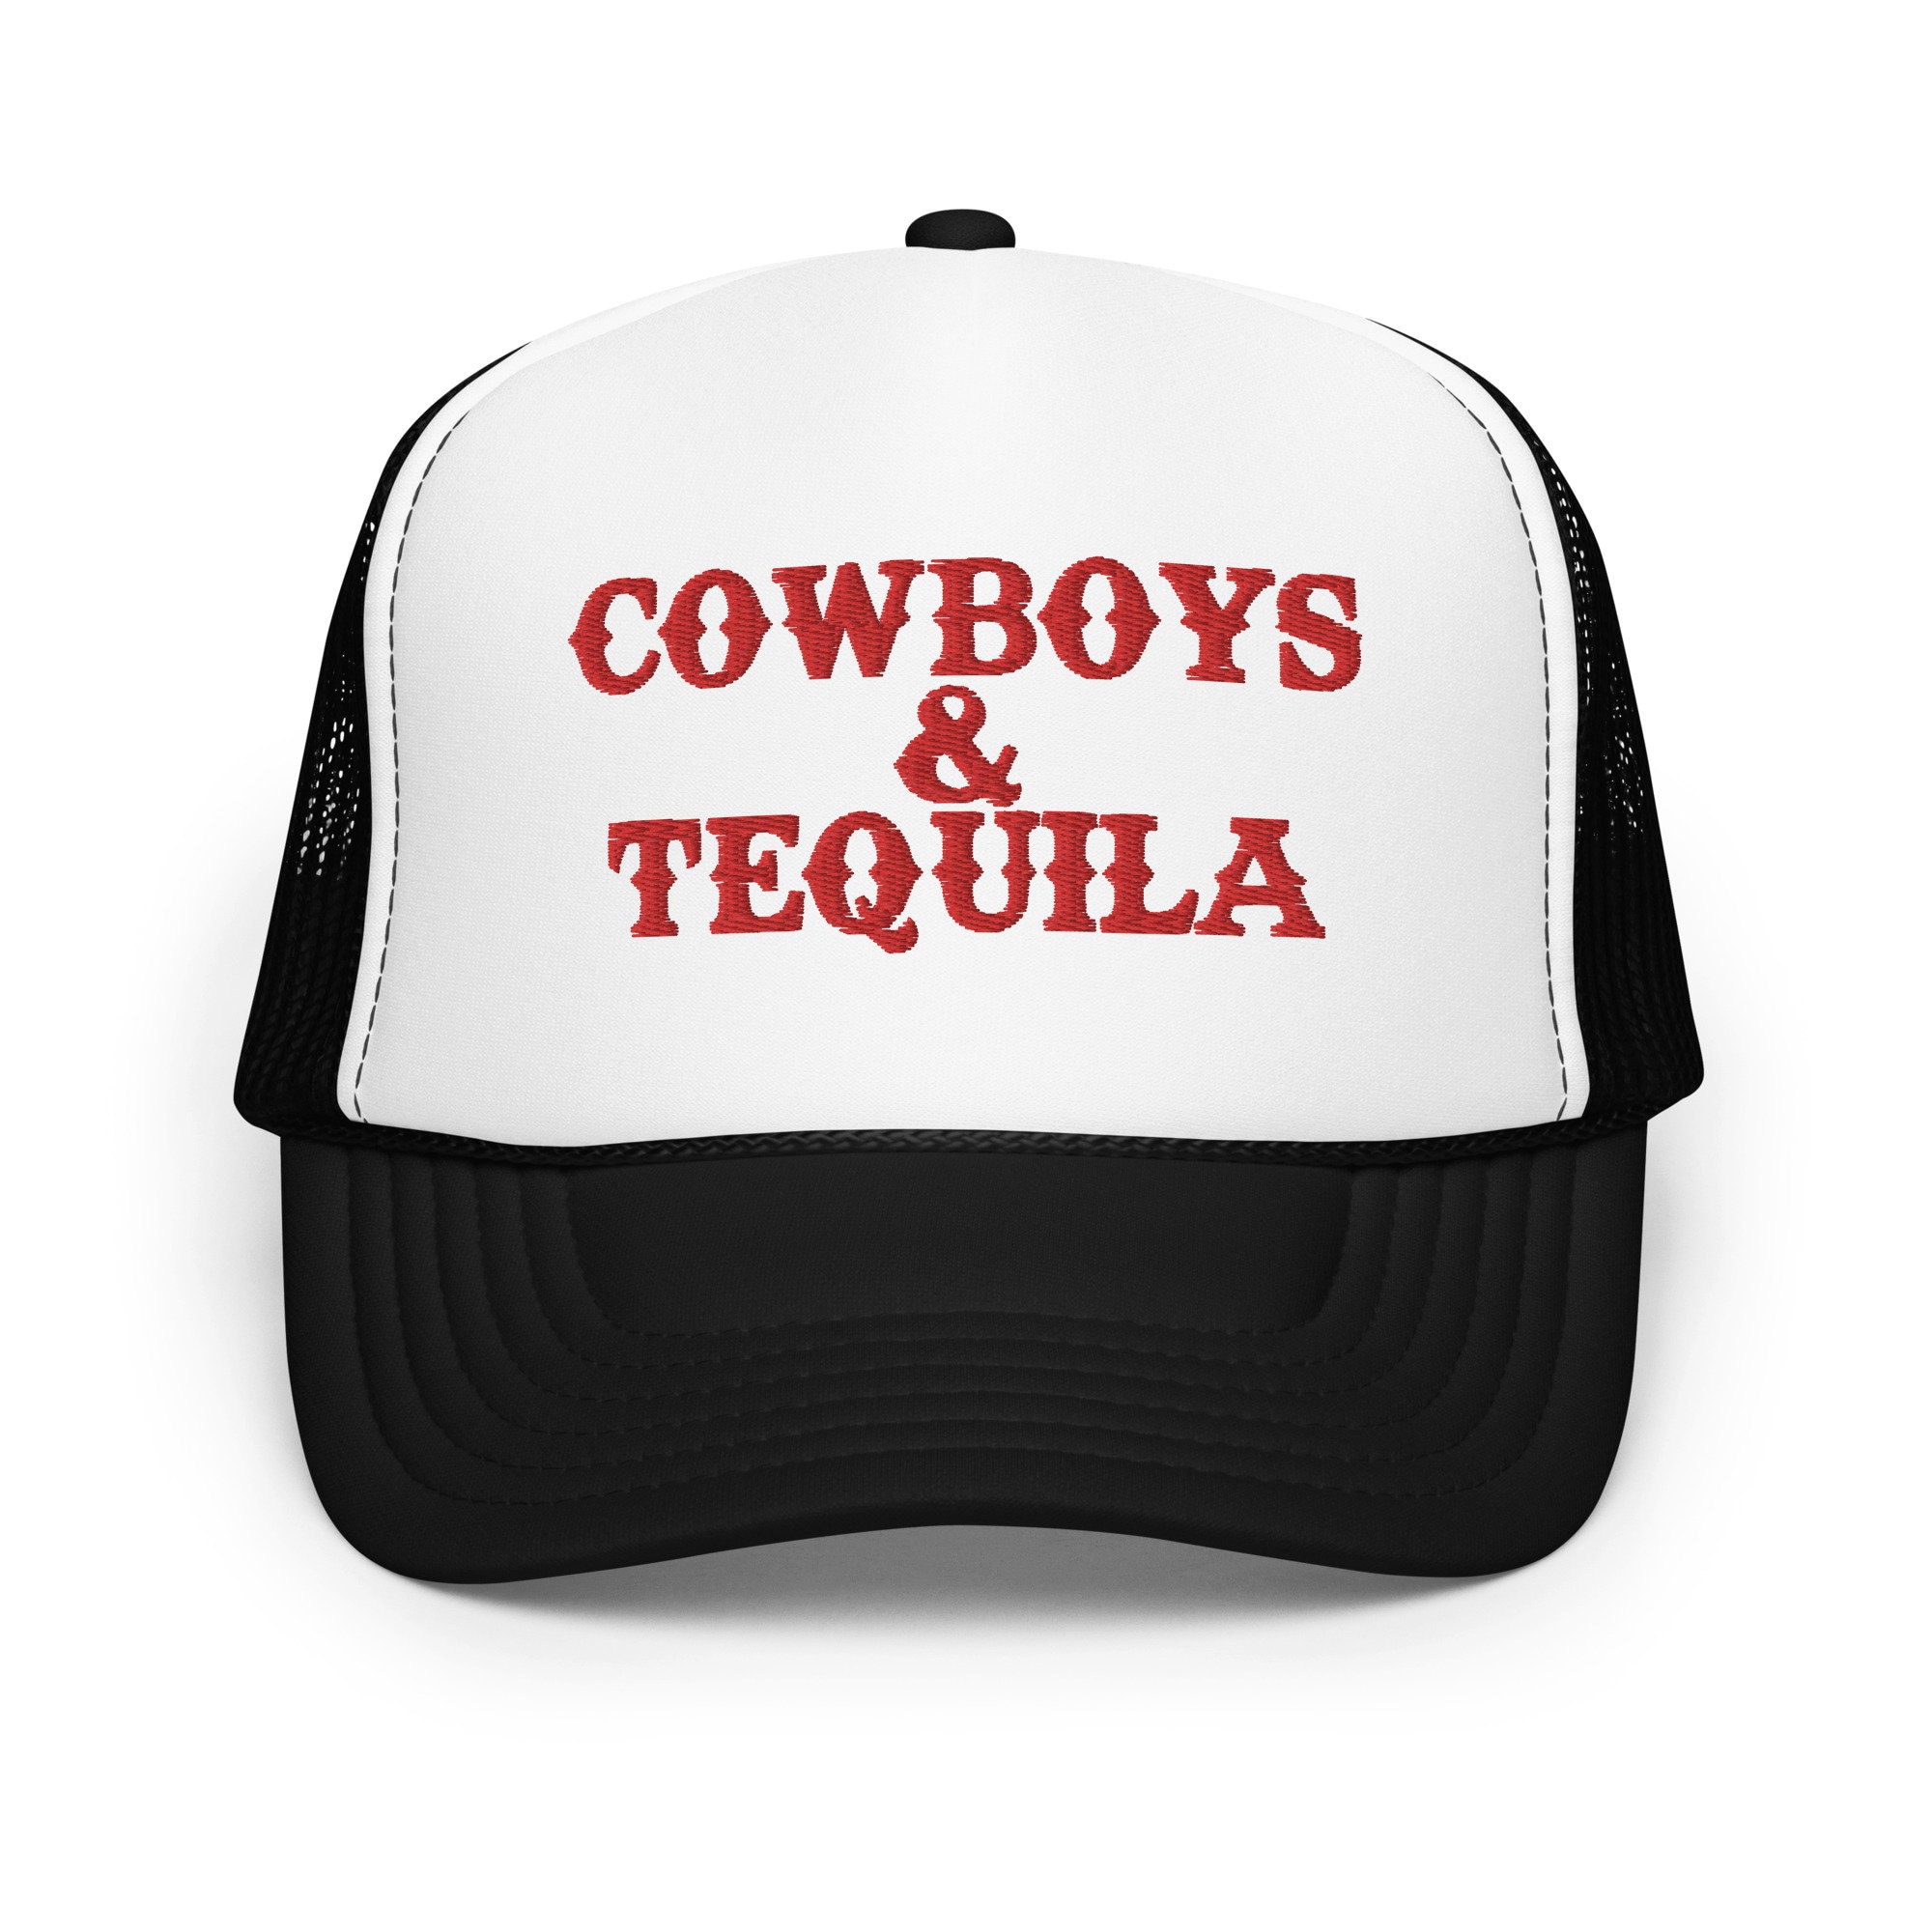 Discover Cowboys & Tequila Trucker Hat, Vintage Budlight Cowboy Hat, Western Trucker Hat, Country music concert